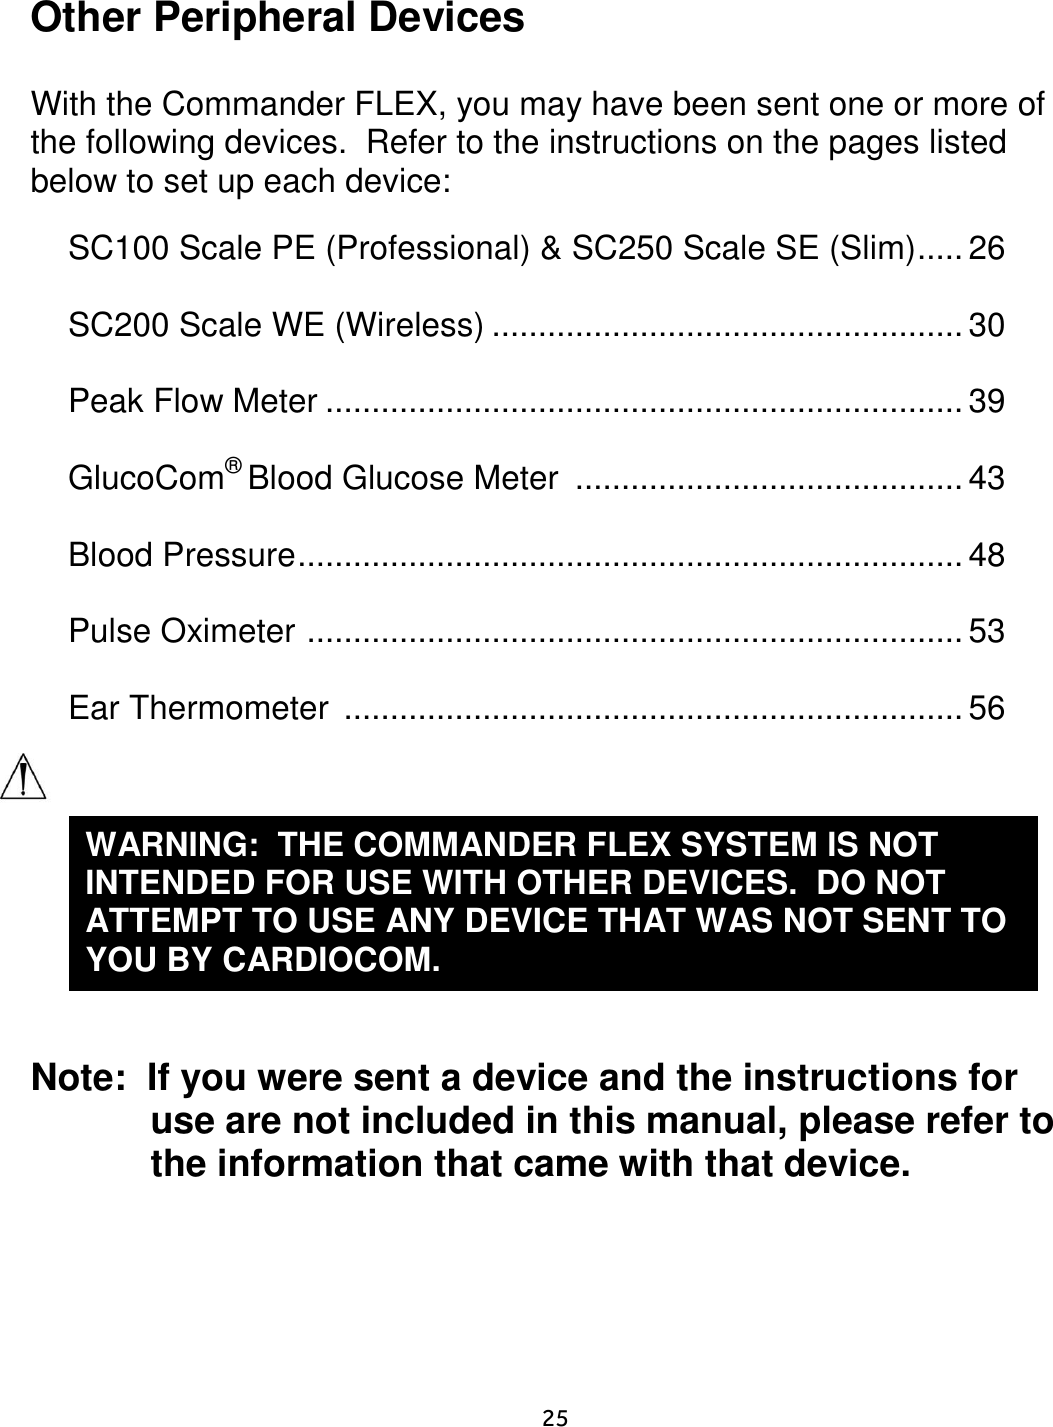     25  Other Peripheral Devices  With the Commander FLEX, you may have been sent one or more of the following devices.  Refer to the instructions on the pages listed below to set up each device:  SC100 Scale PE (Professional) &amp; SC250 Scale SE (Slim) ..... 26  SC200 Scale WE (Wireless) ................................................... 30  Peak Flow Meter ..................................................................... 39  GlucoCom® Blood Glucose Meter  .......................................... 43  Blood Pressure ........................................................................ 48  Pulse Oximeter  ....................................................................... 53  Ear Thermometer  ................................................................... 56     Note:  If you were sent a device and the instructions for use are not included in this manual, please refer to the information that came with that device.   WARNING:  THE COMMANDER FLEX SYSTEM IS NOT INTENDED FOR USE WITH OTHER DEVICES.  DO NOT ATTEMPT TO USE ANY DEVICE THAT WAS NOT SENT TO YOU BY CARDIOCOM. 